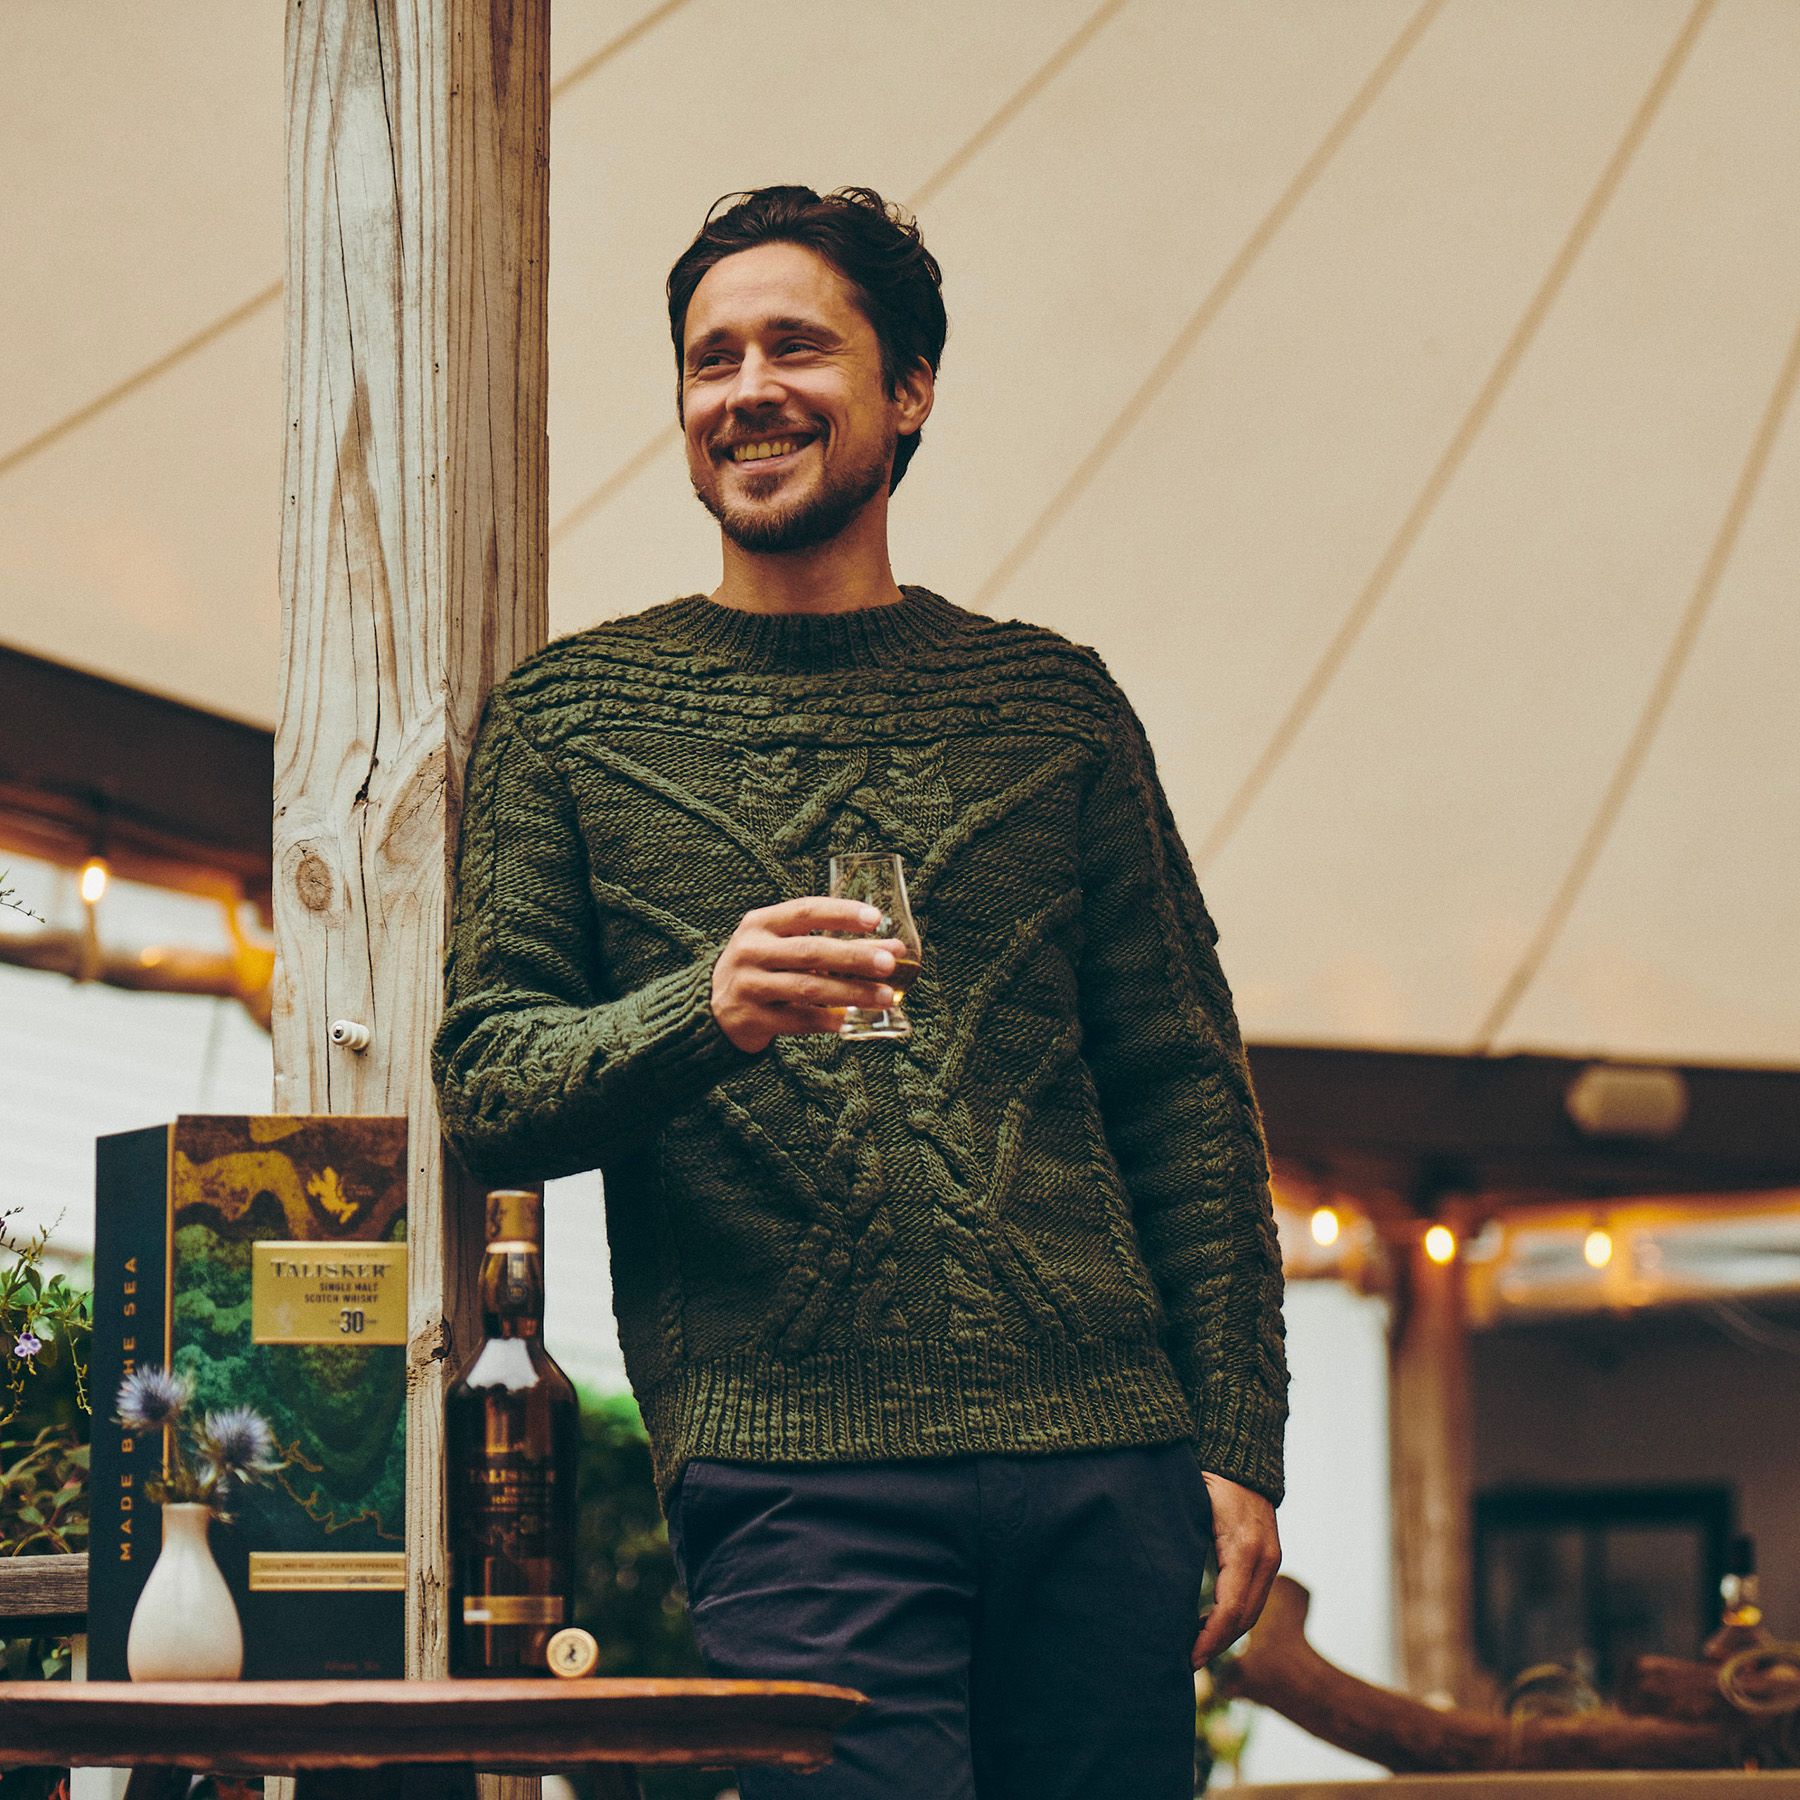 Talisker is partnering with actor and writer Peter Gadiot to inspire individuals to embrace the outdoors and reconnect with the natural world. Together, they aim to ignite a sense of adventure, inviting whisky aficionados to raise a glass to the wild spirits within them.